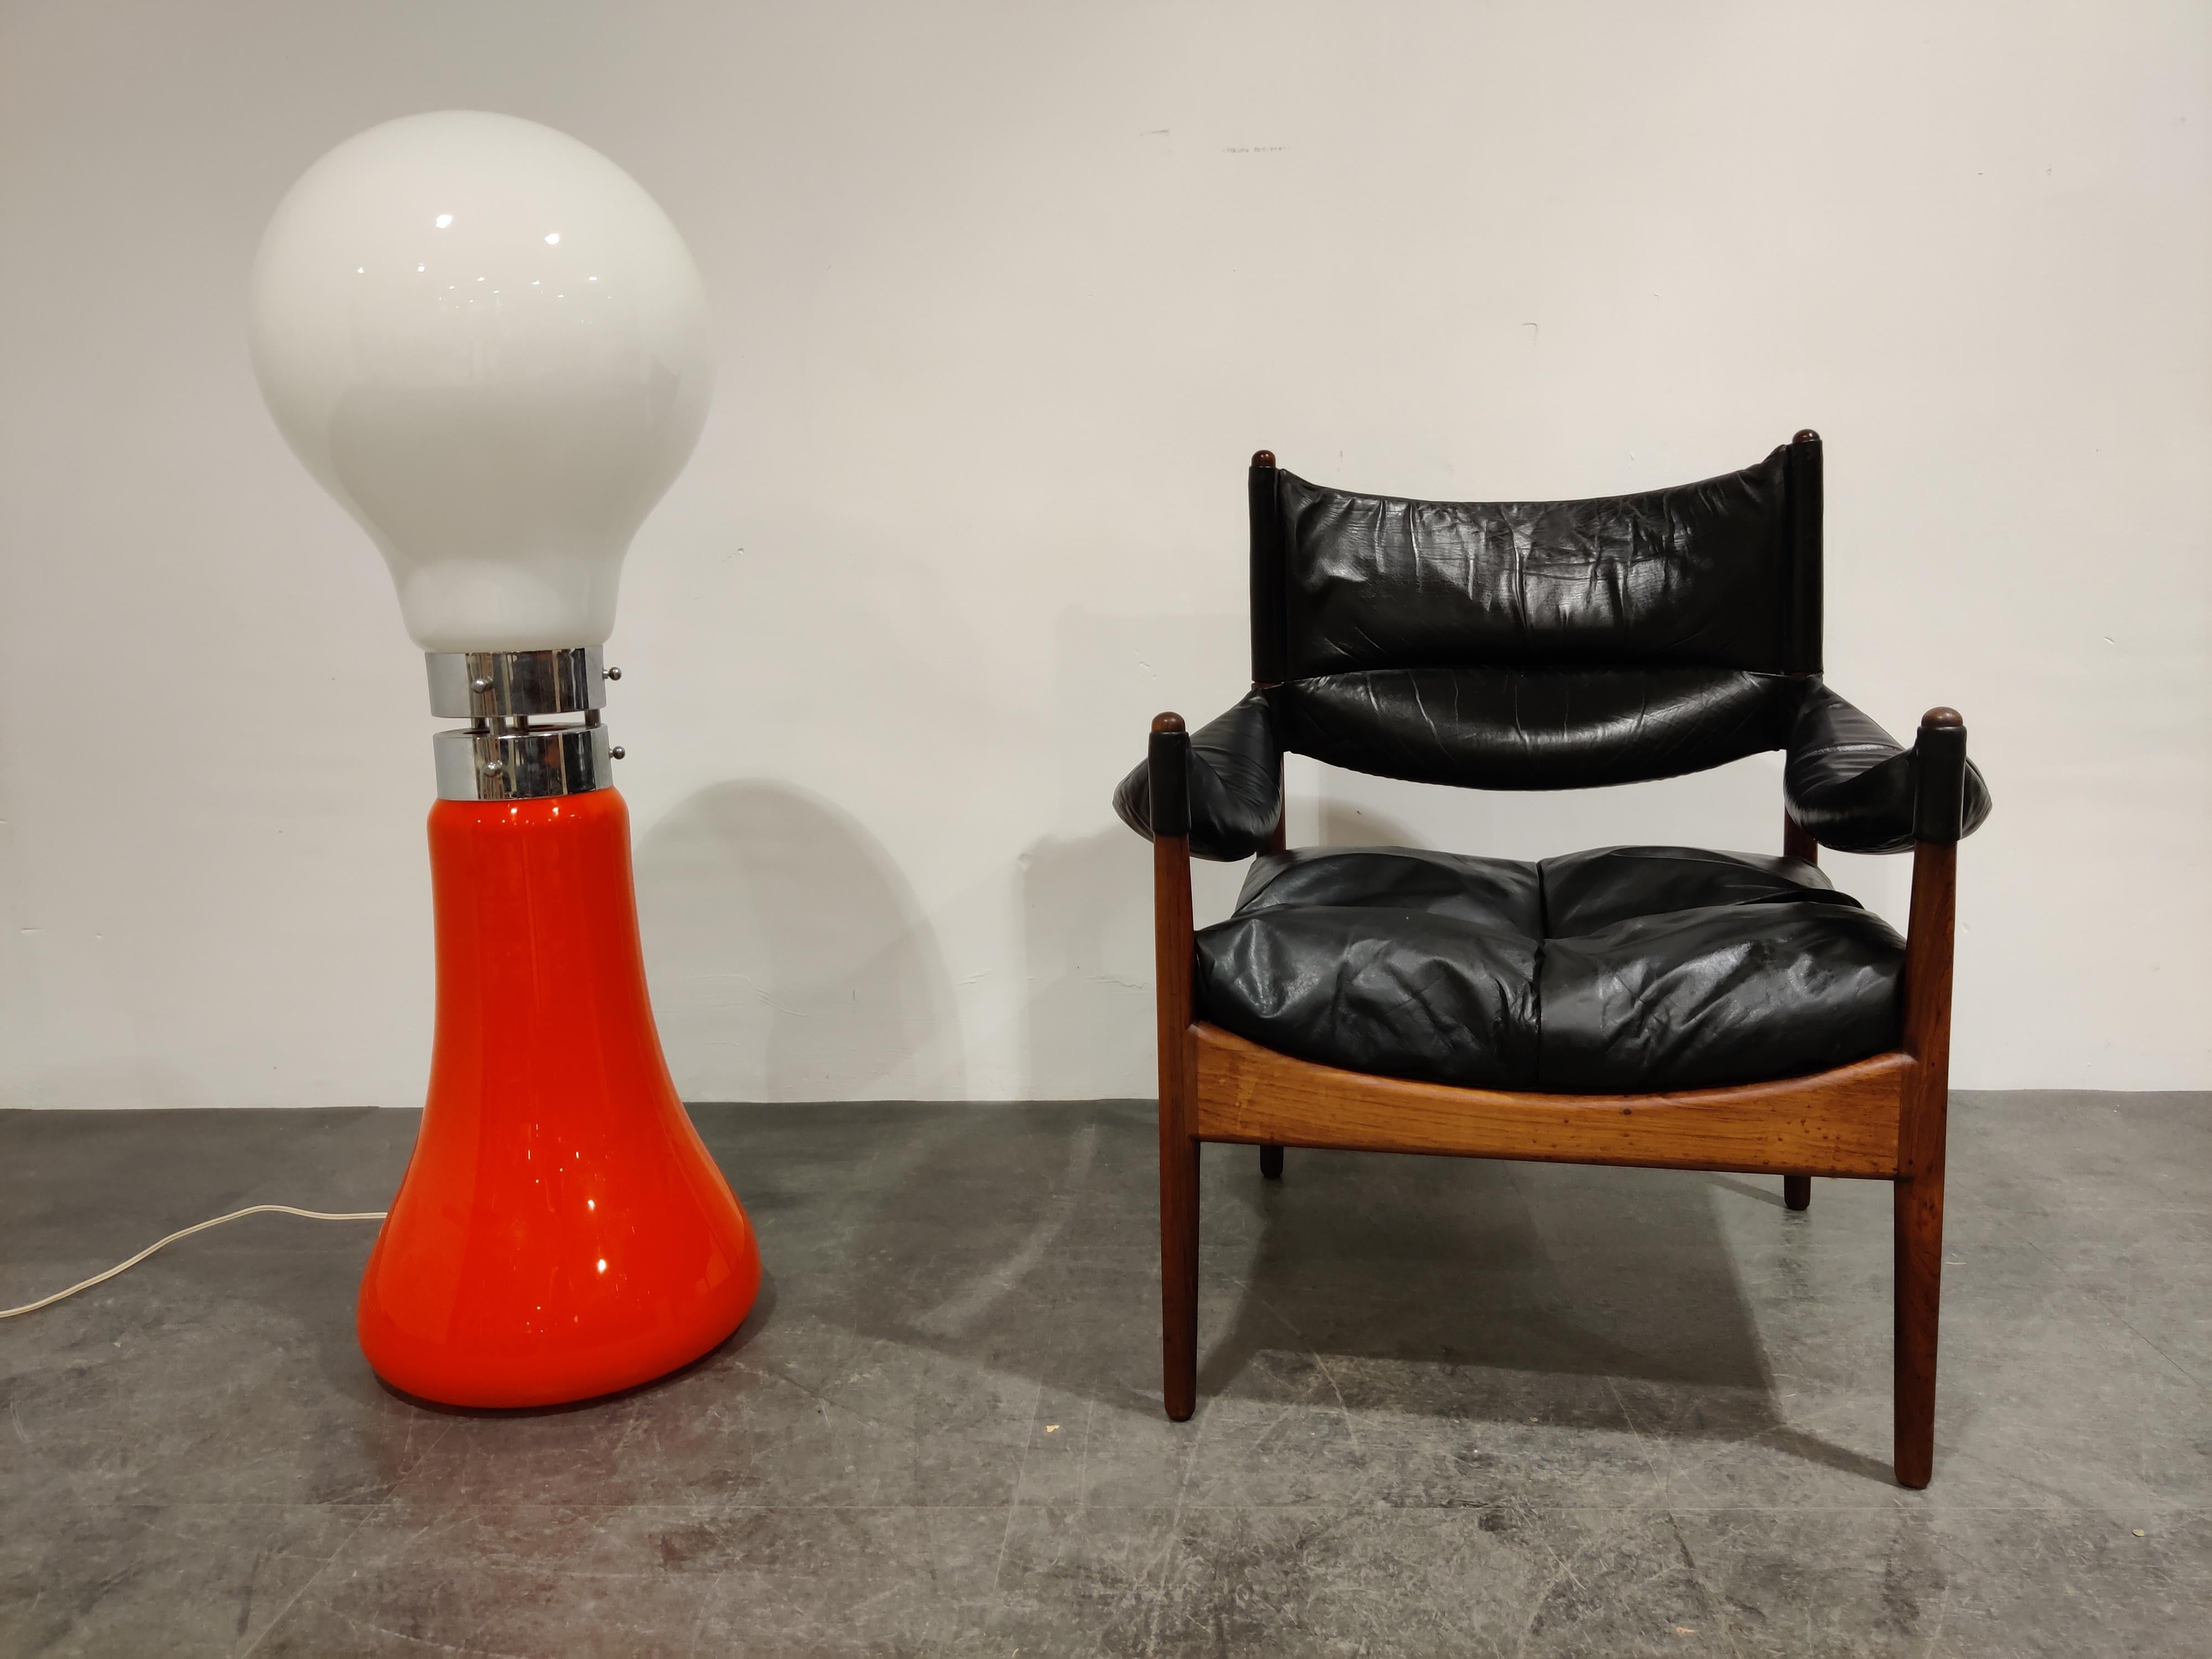 Timeless floor lamp model 'birillo' designed by Carlo Nason for AV Mazzega.

Beautiful Space Age orange color with a white glass bulb shaped shade. The entire lamp is made out of glass with chromed center pieces.

The lamp works with two regular